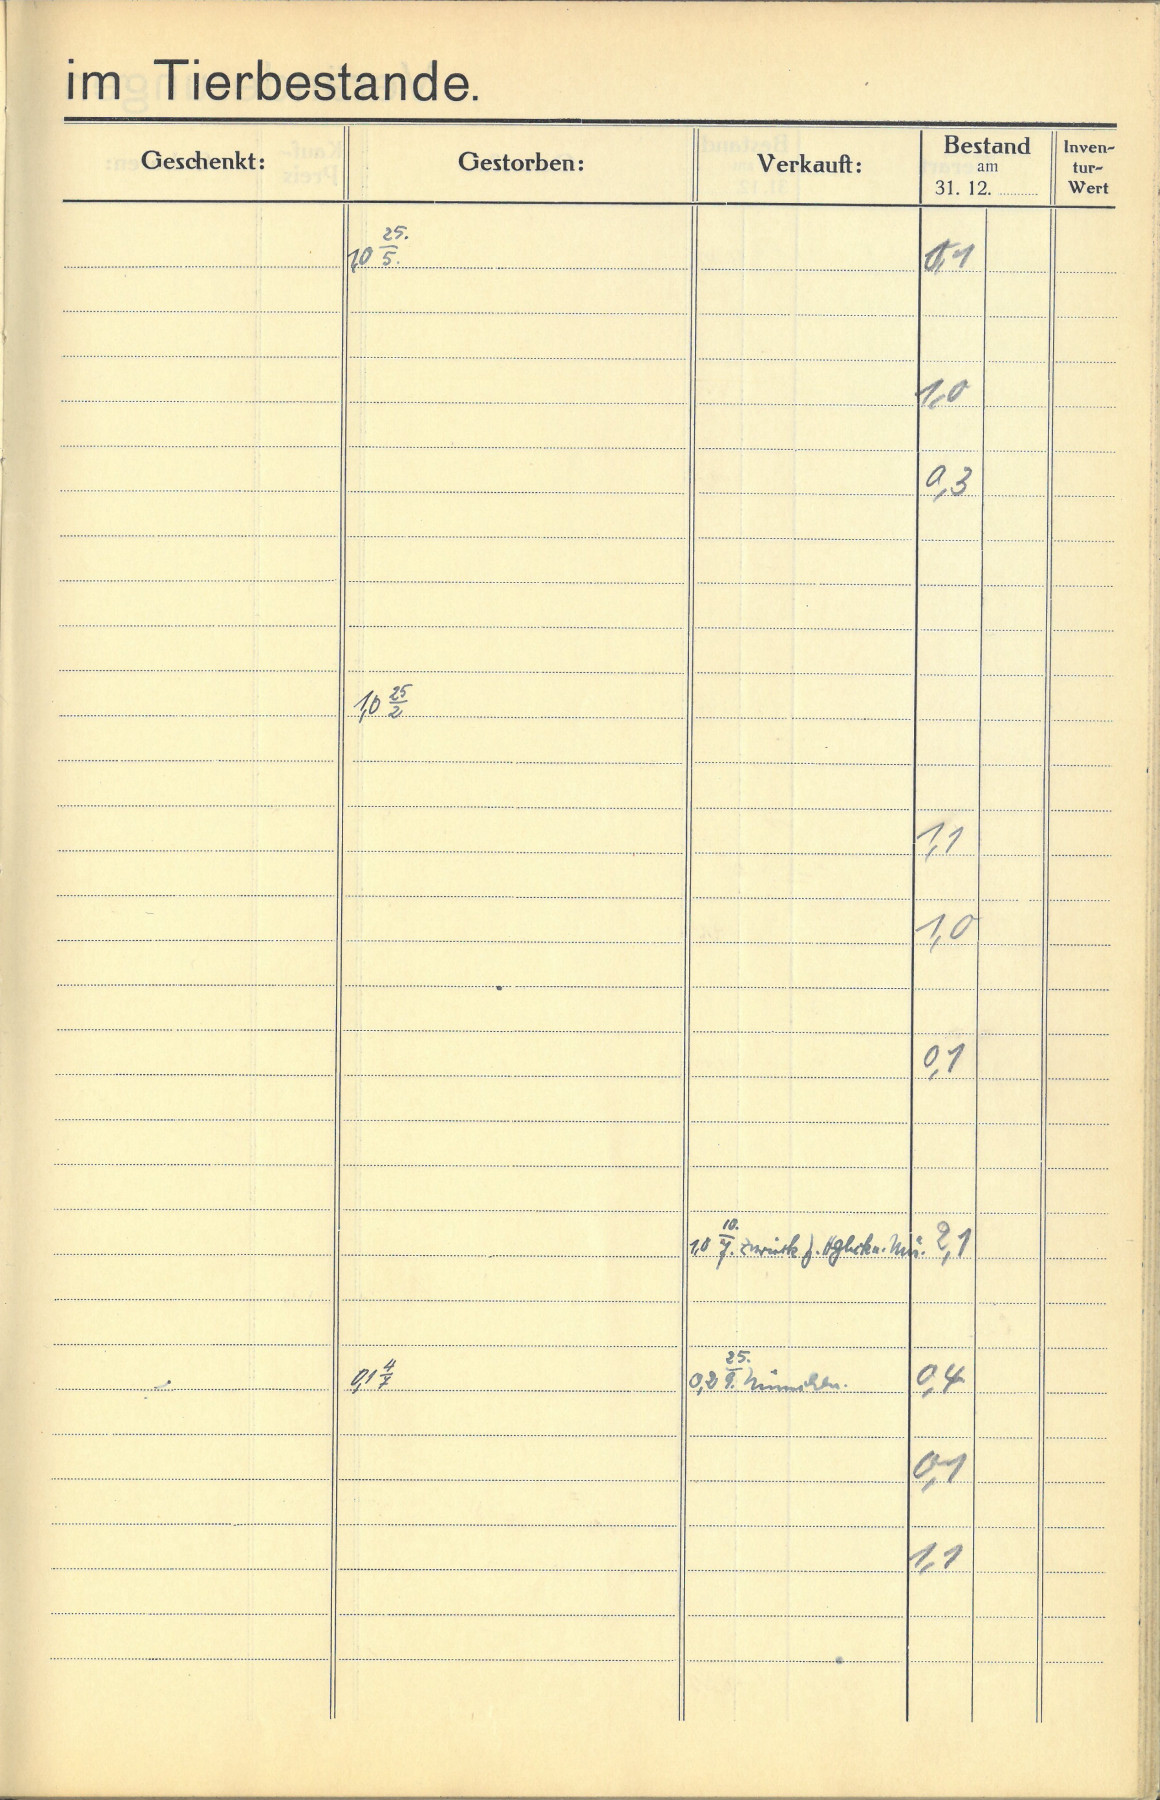 Right-hand page from handwritten journal with heading: Change in animal stocks. Columns on right-hand side: Gifted, Died, Sold, Stocks, Inventory value. 